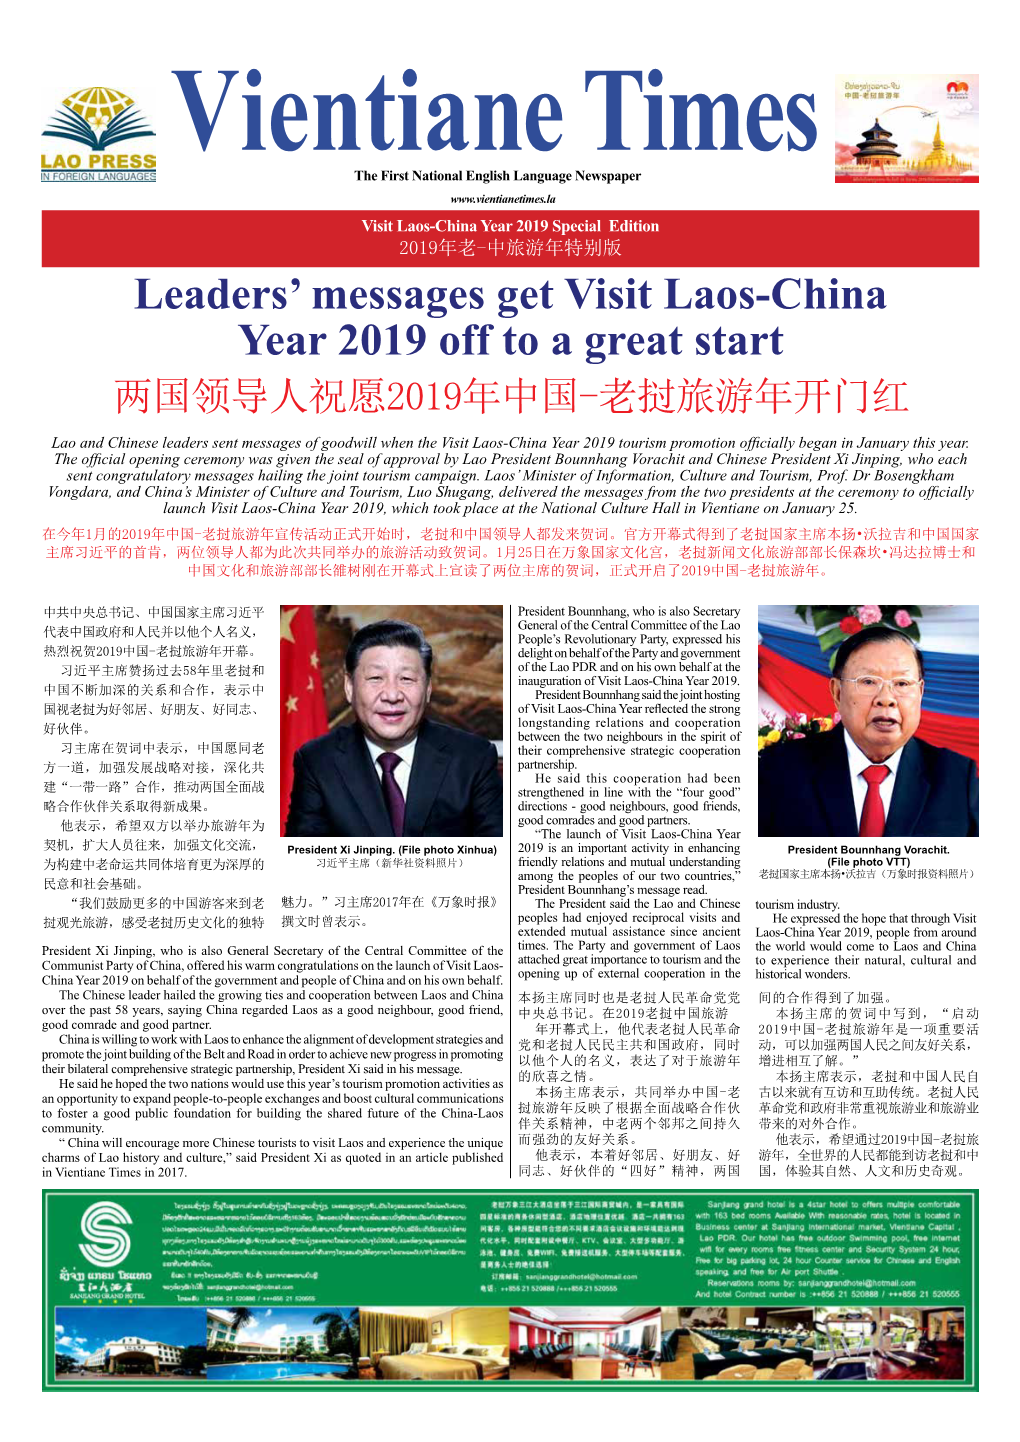 Leaders' Messages Get Visit Laos-China Year 2019 Off to a Great